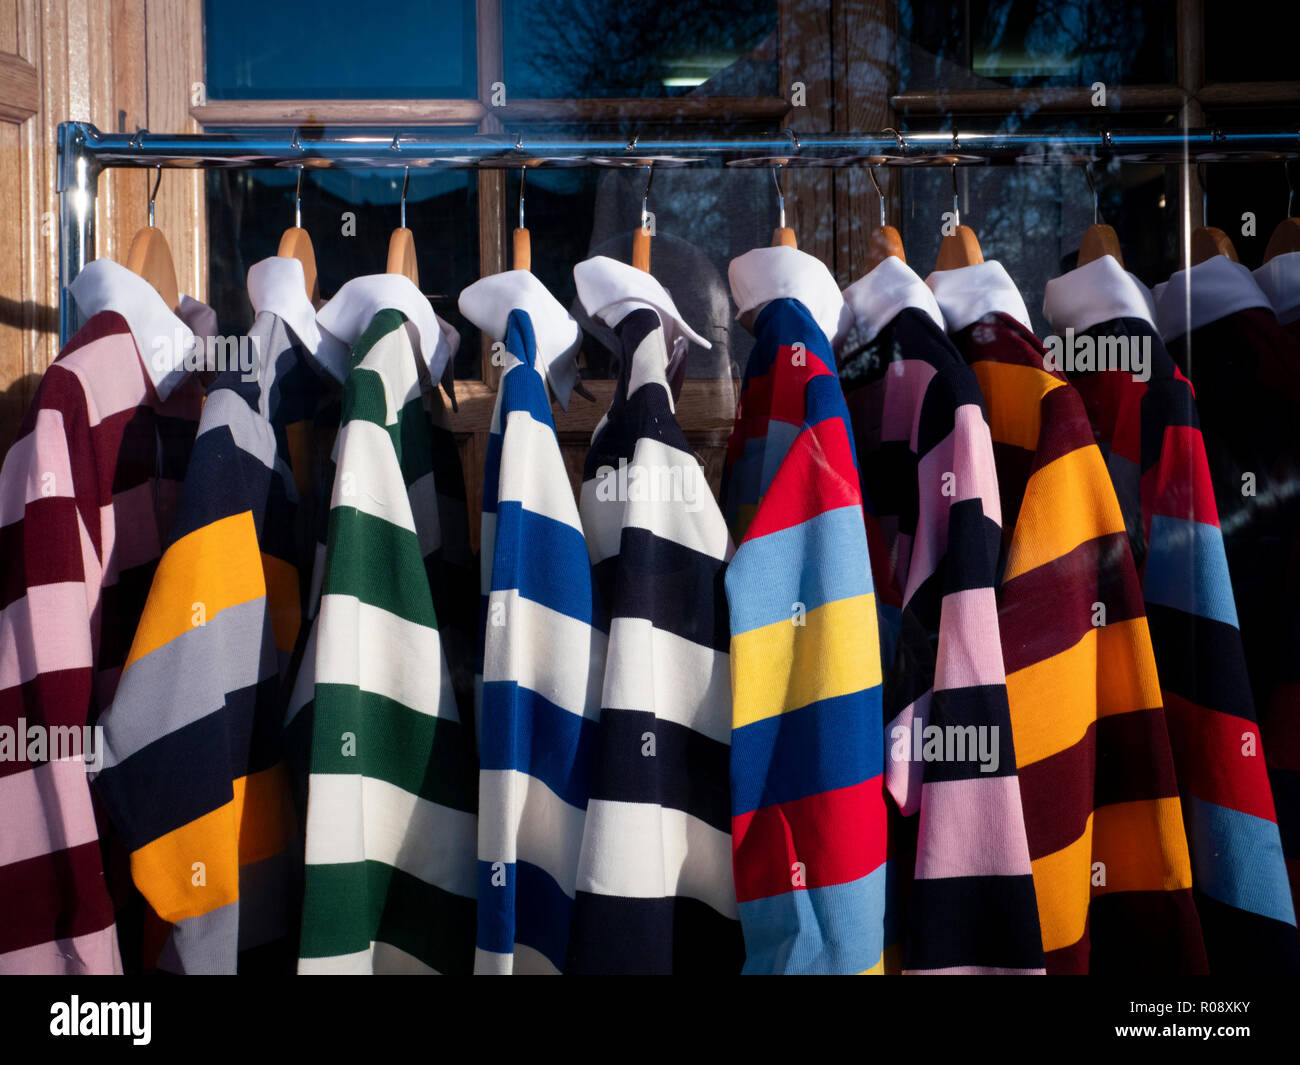 Colourful Cambridge University college rugby shirts hanging up for sale in a shop window display in Cambridge UK Stock Photo